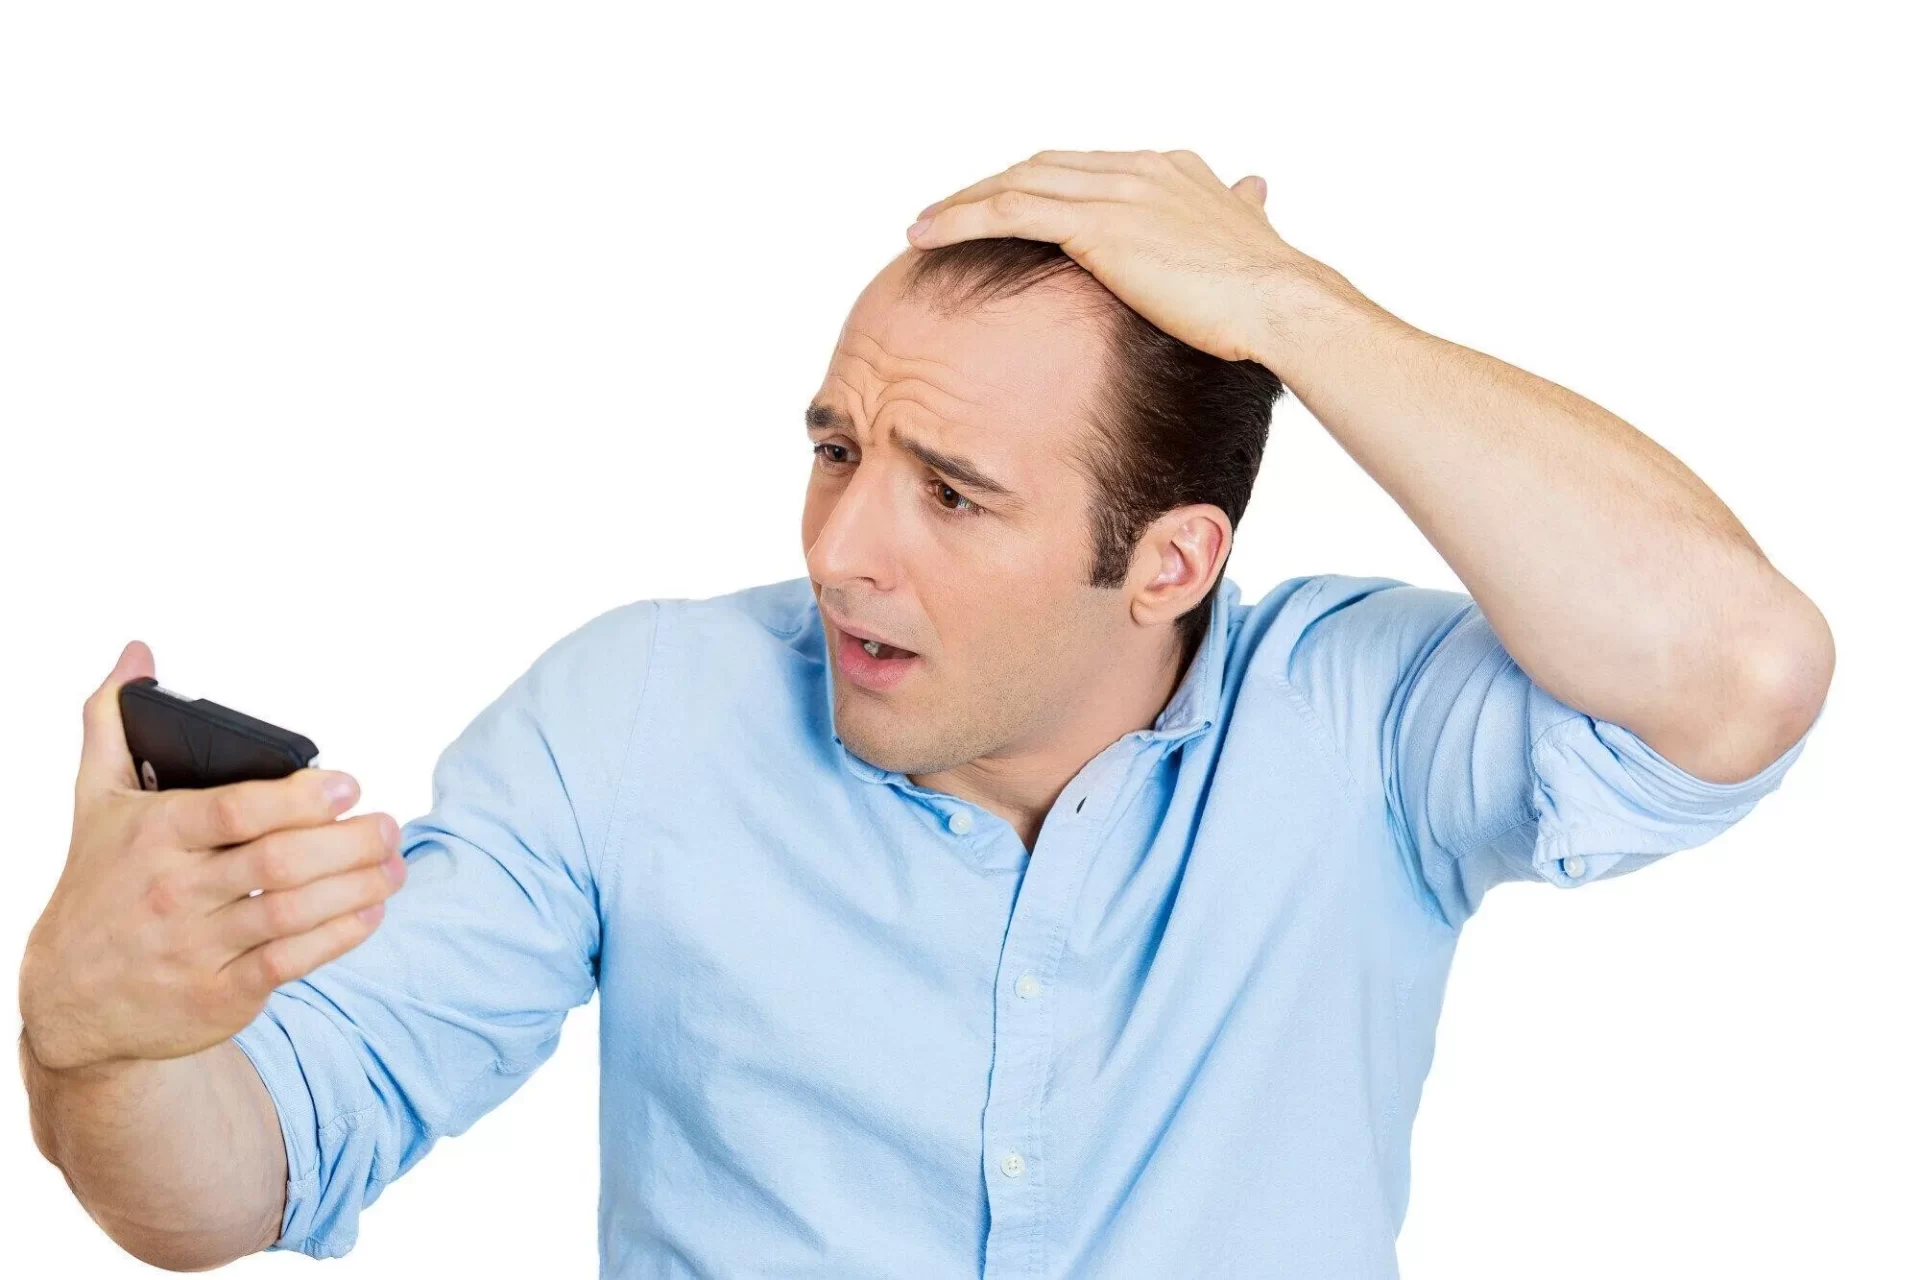 6 Common Signs of a Receding Hairline You Need to Know